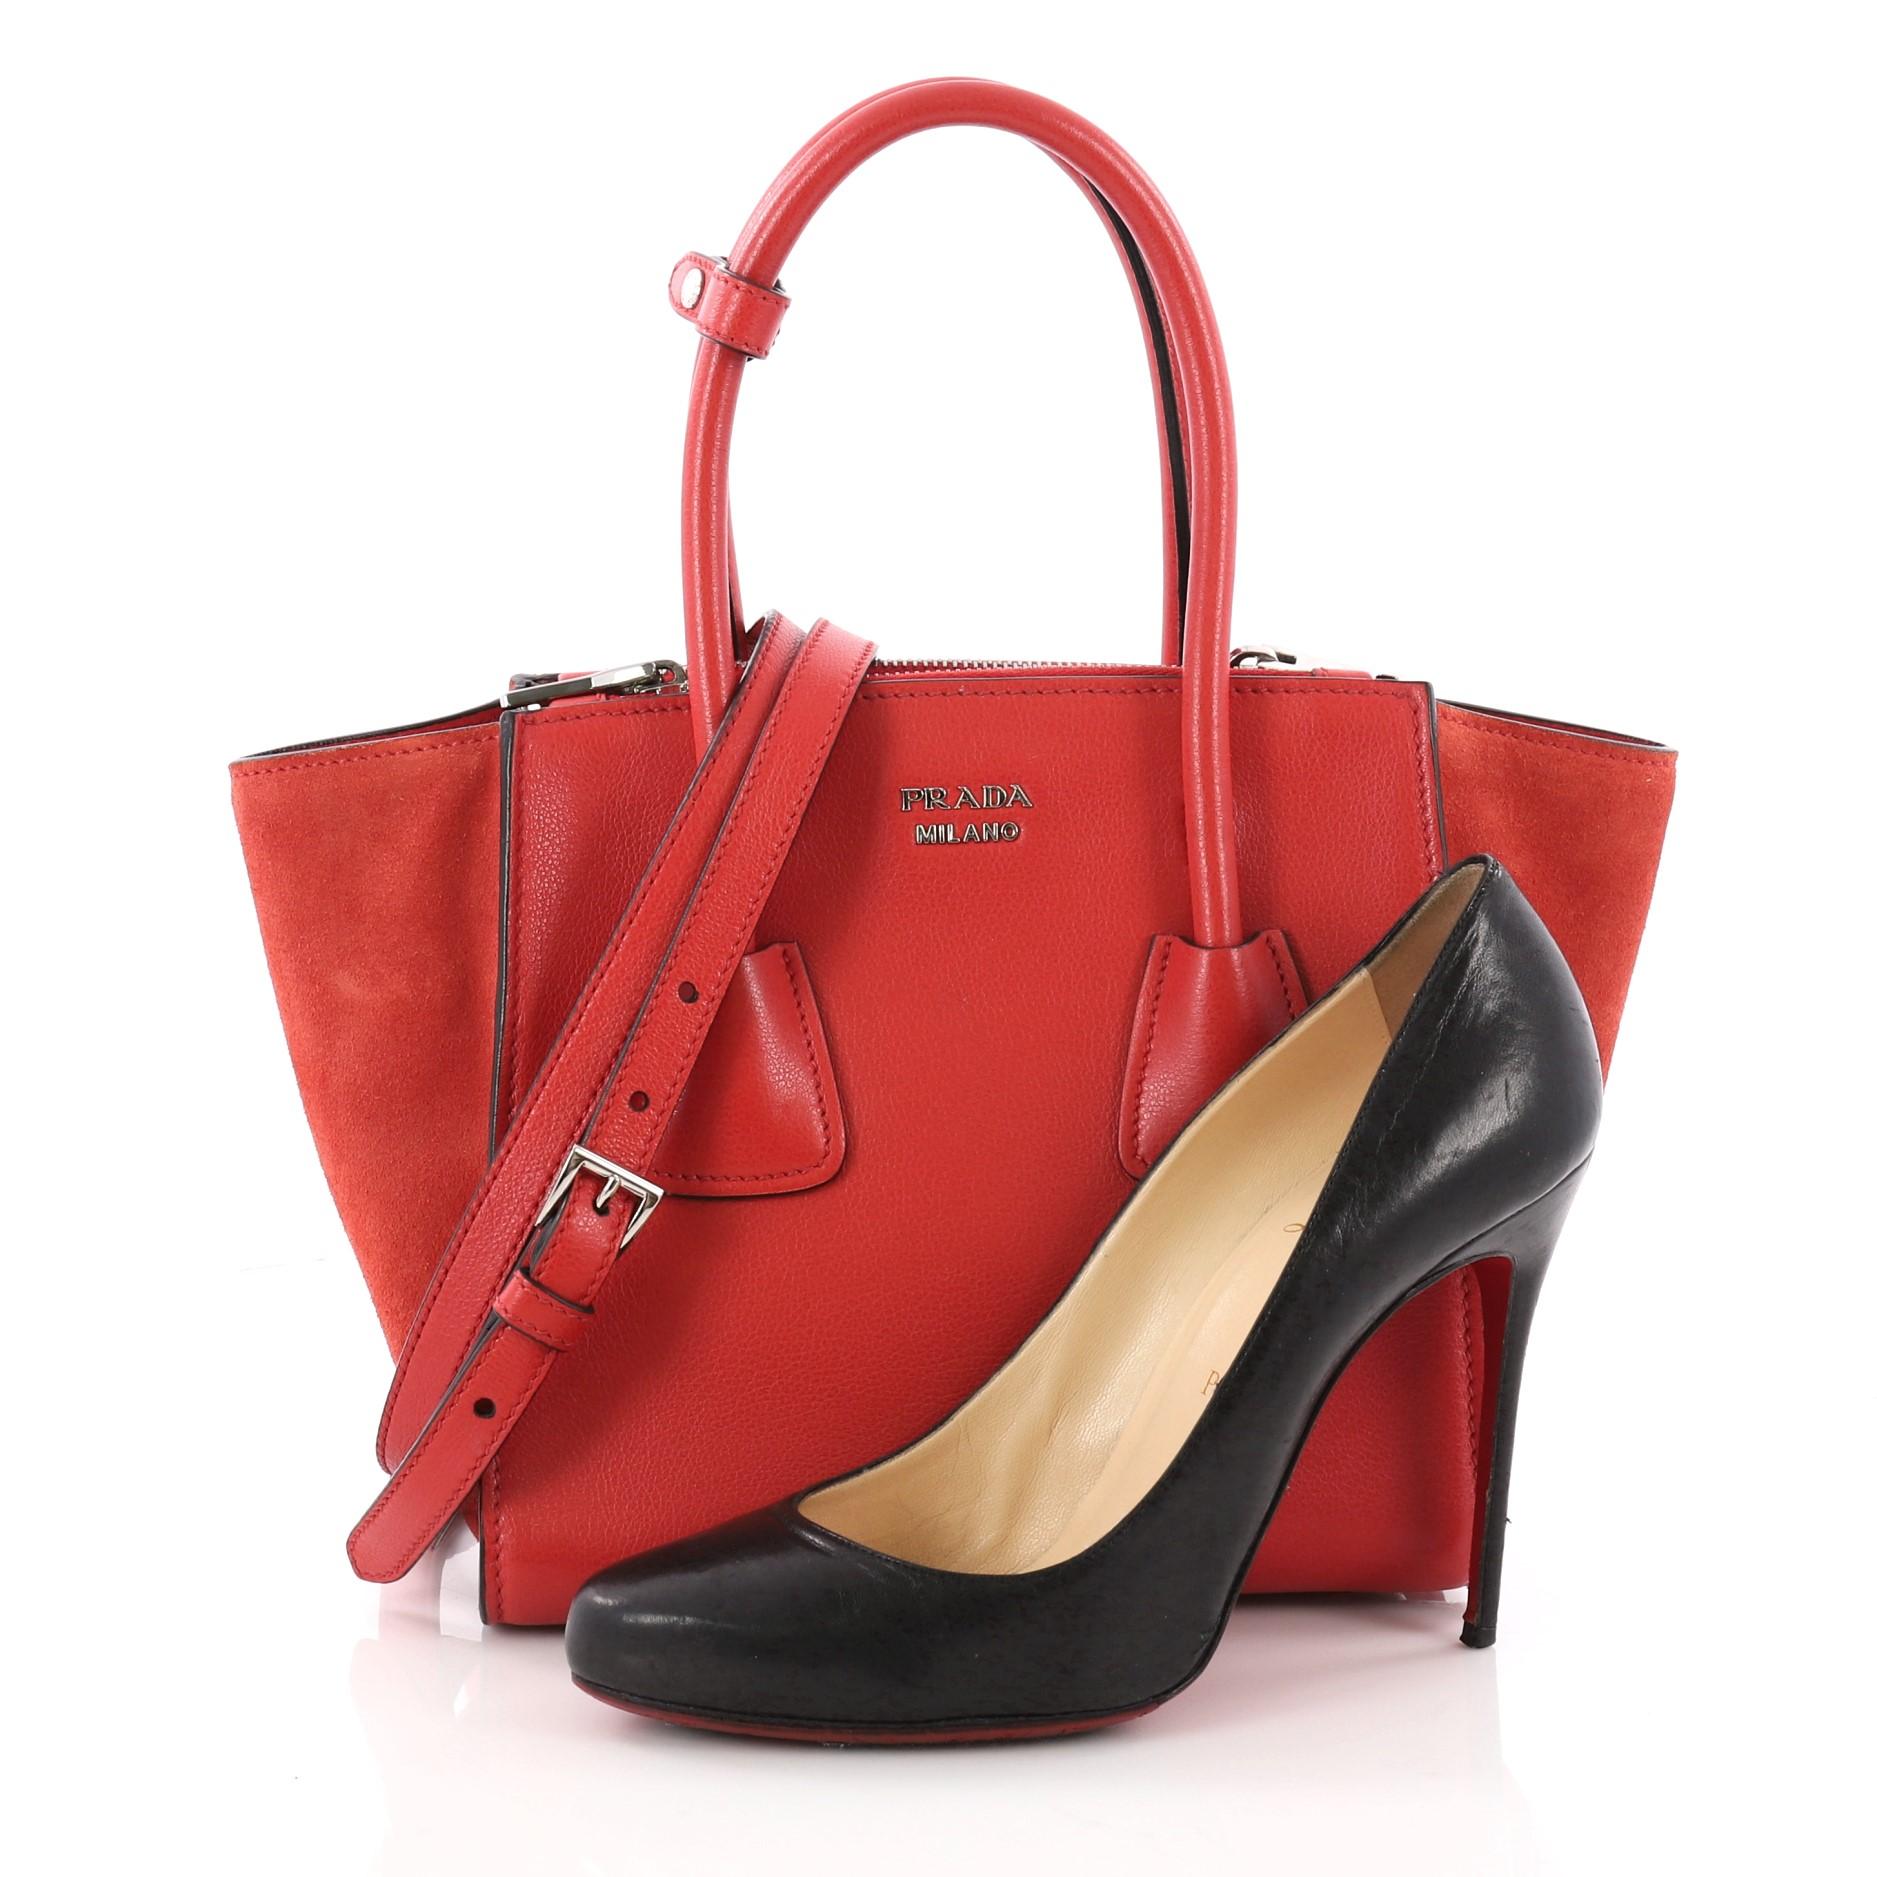 This authentic Prada Twin Pocket Tote Glace Calf and Suede Mini showcases a sophisticated silhouette balancing modern luxury and style perfect for the on-the-go woman. Crafted from red glace calf leather and suede, this boxy tote features tall